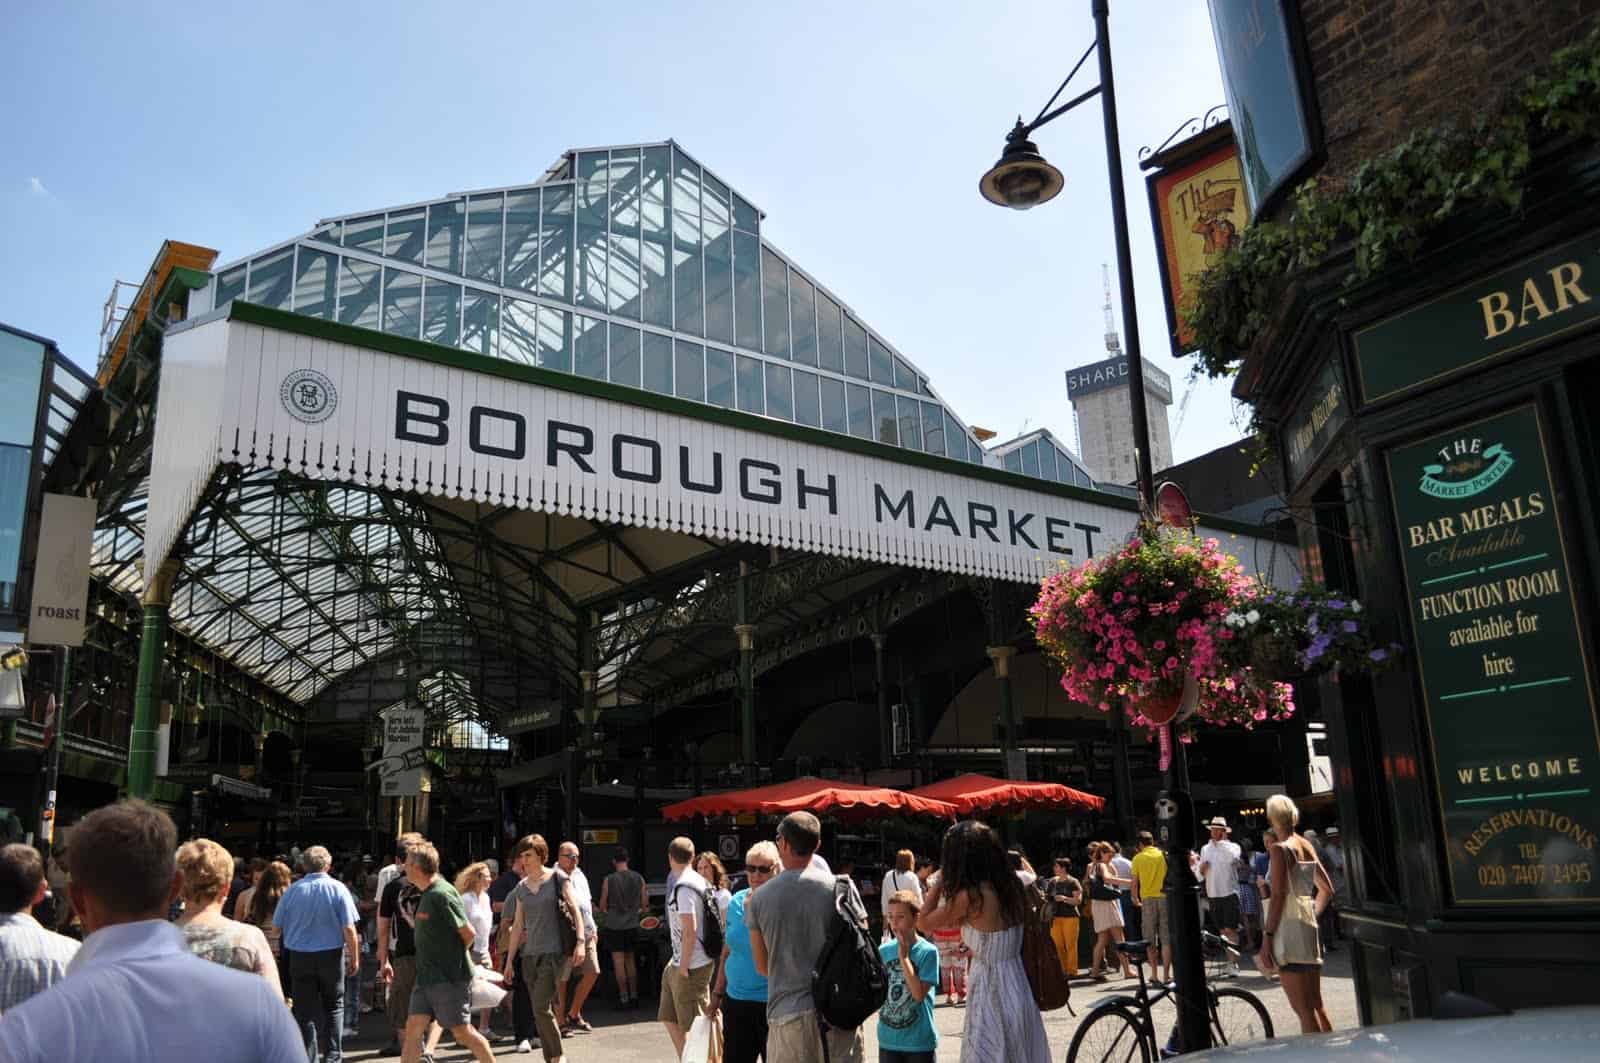 Borough Market in London on a sunny day